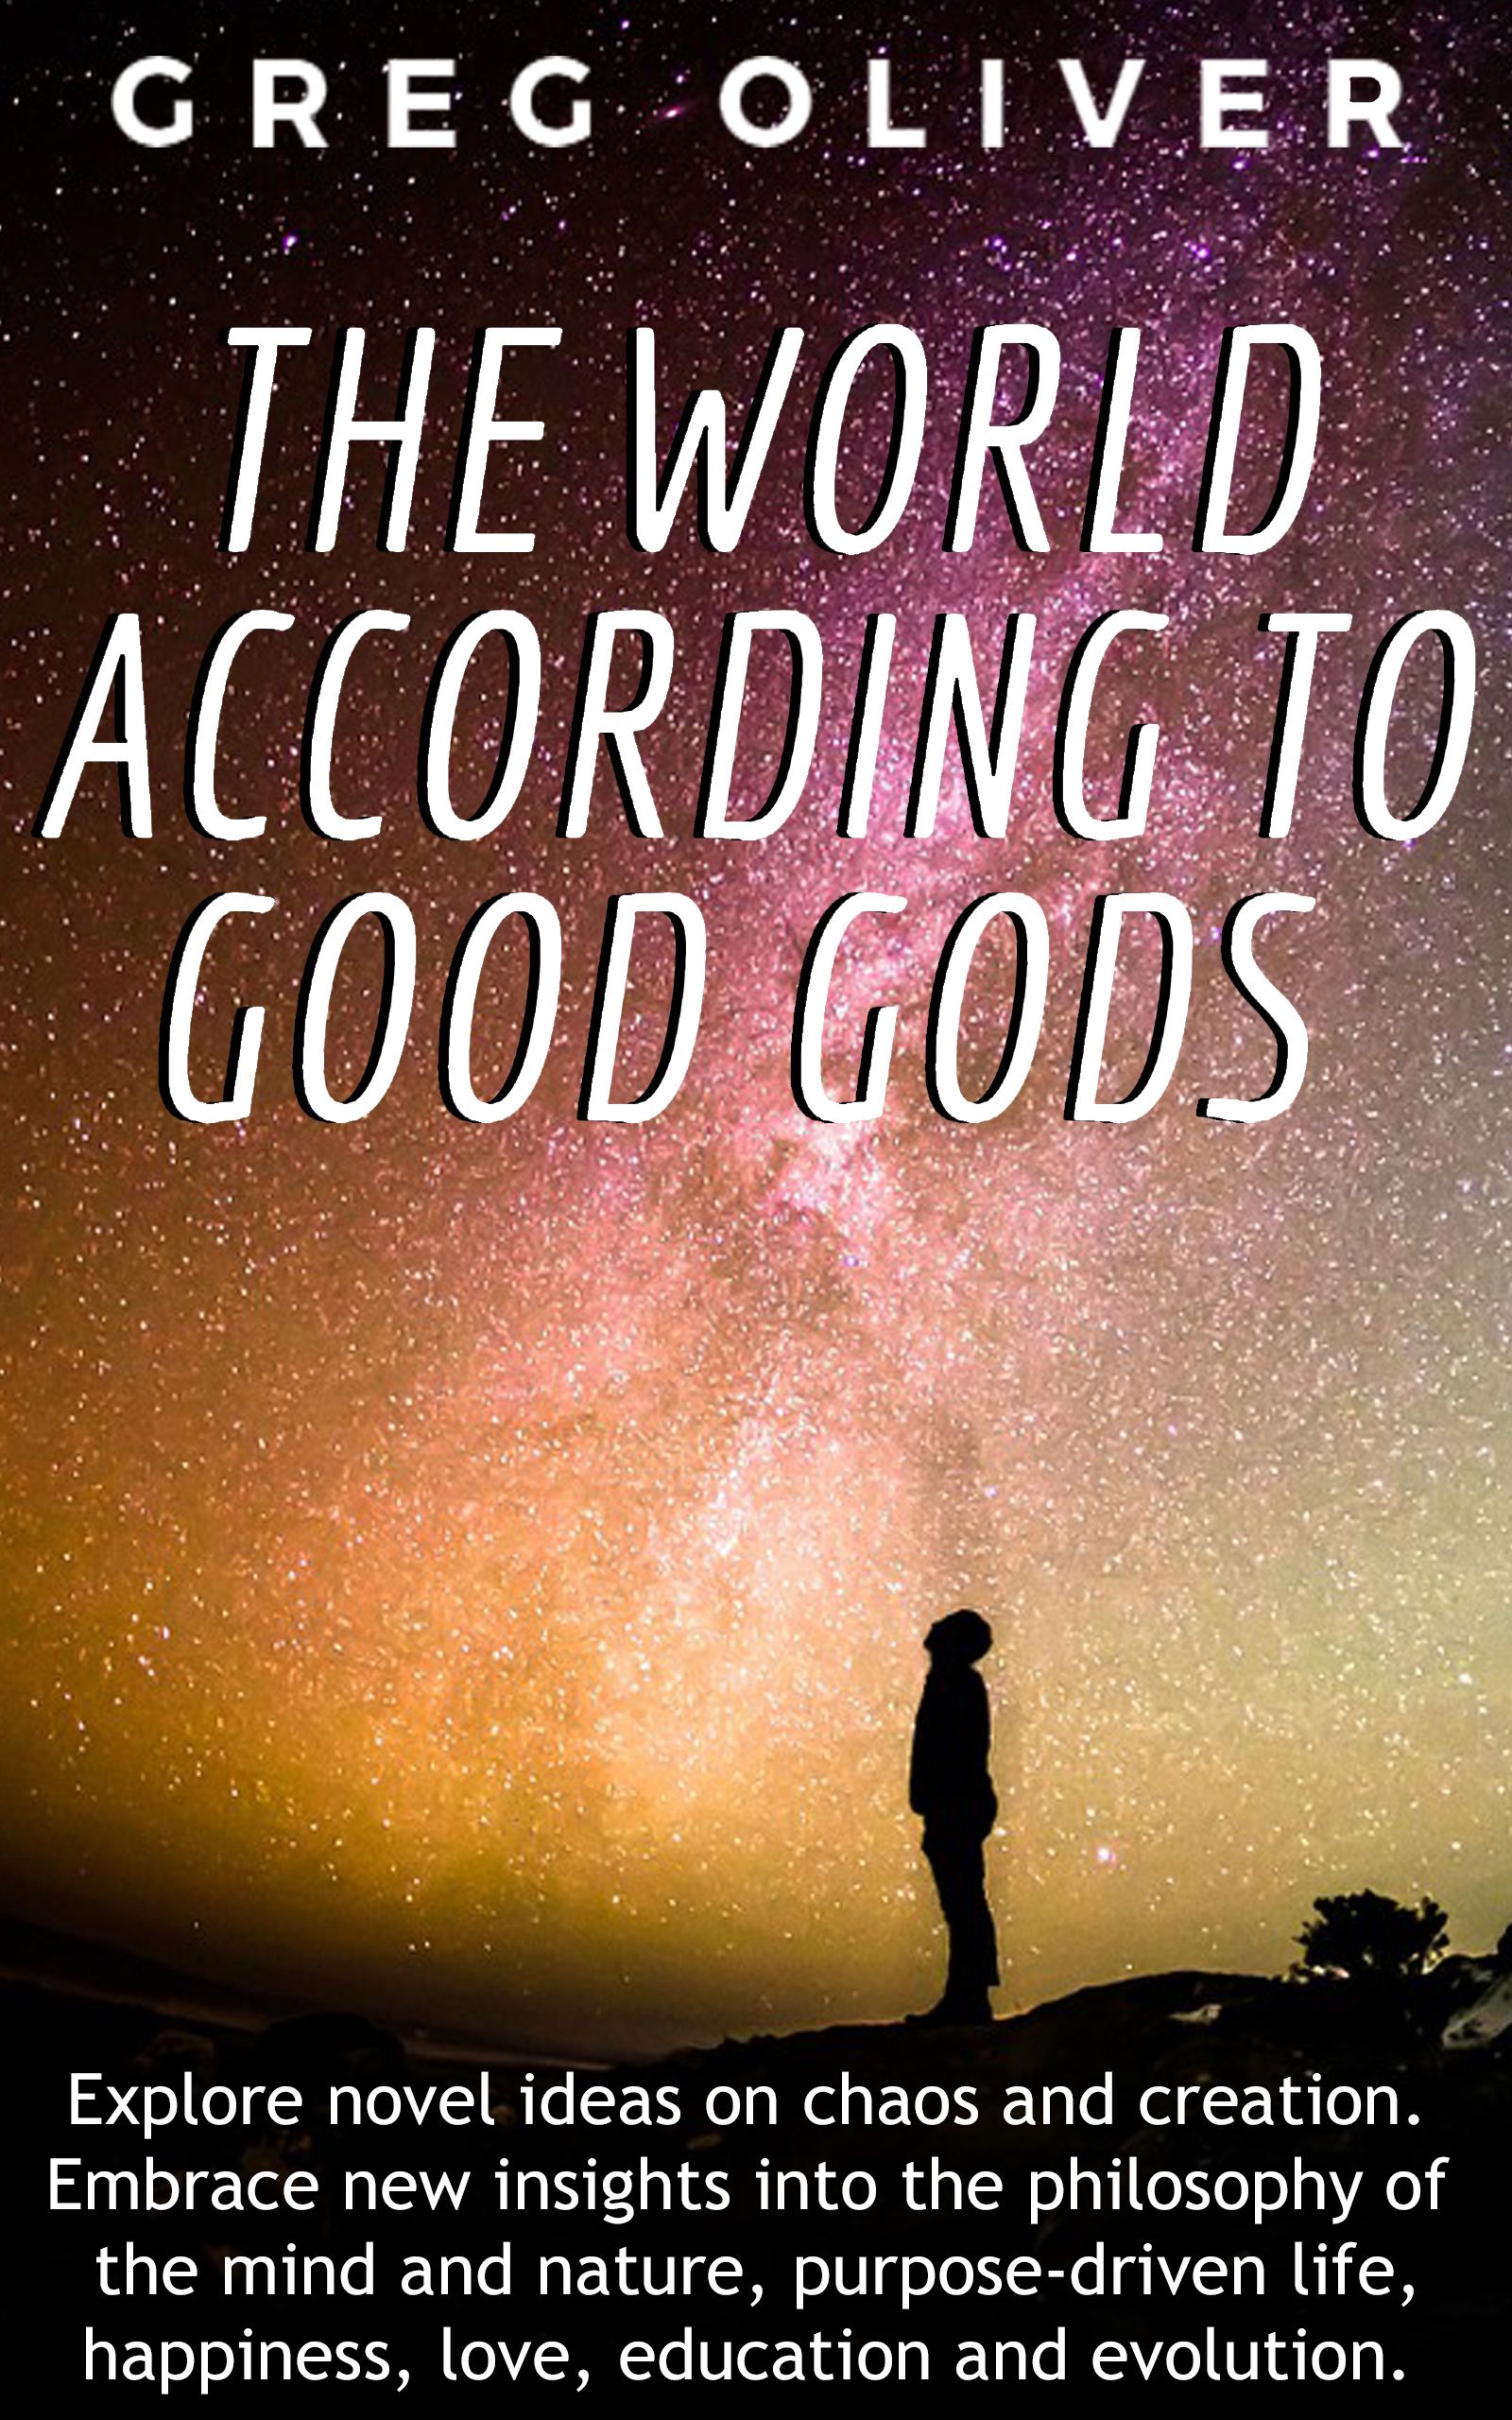 The World According To Good Gods by Greg Oliver